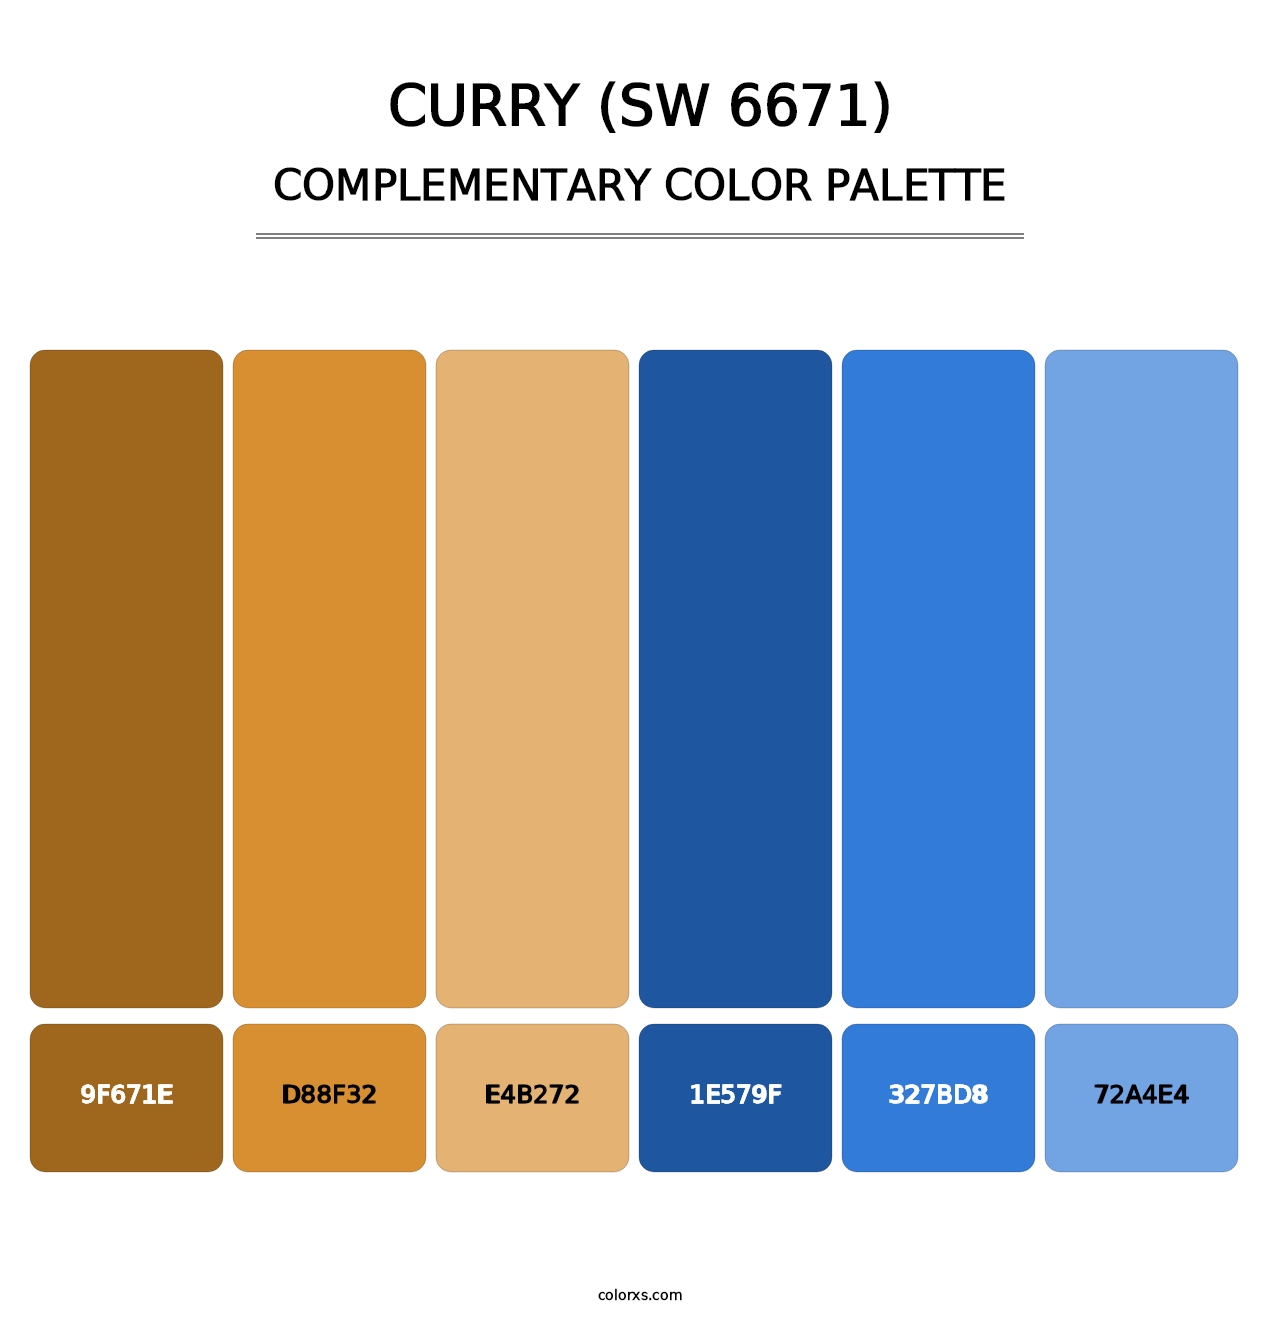 Curry (SW 6671) - Complementary Color Palette